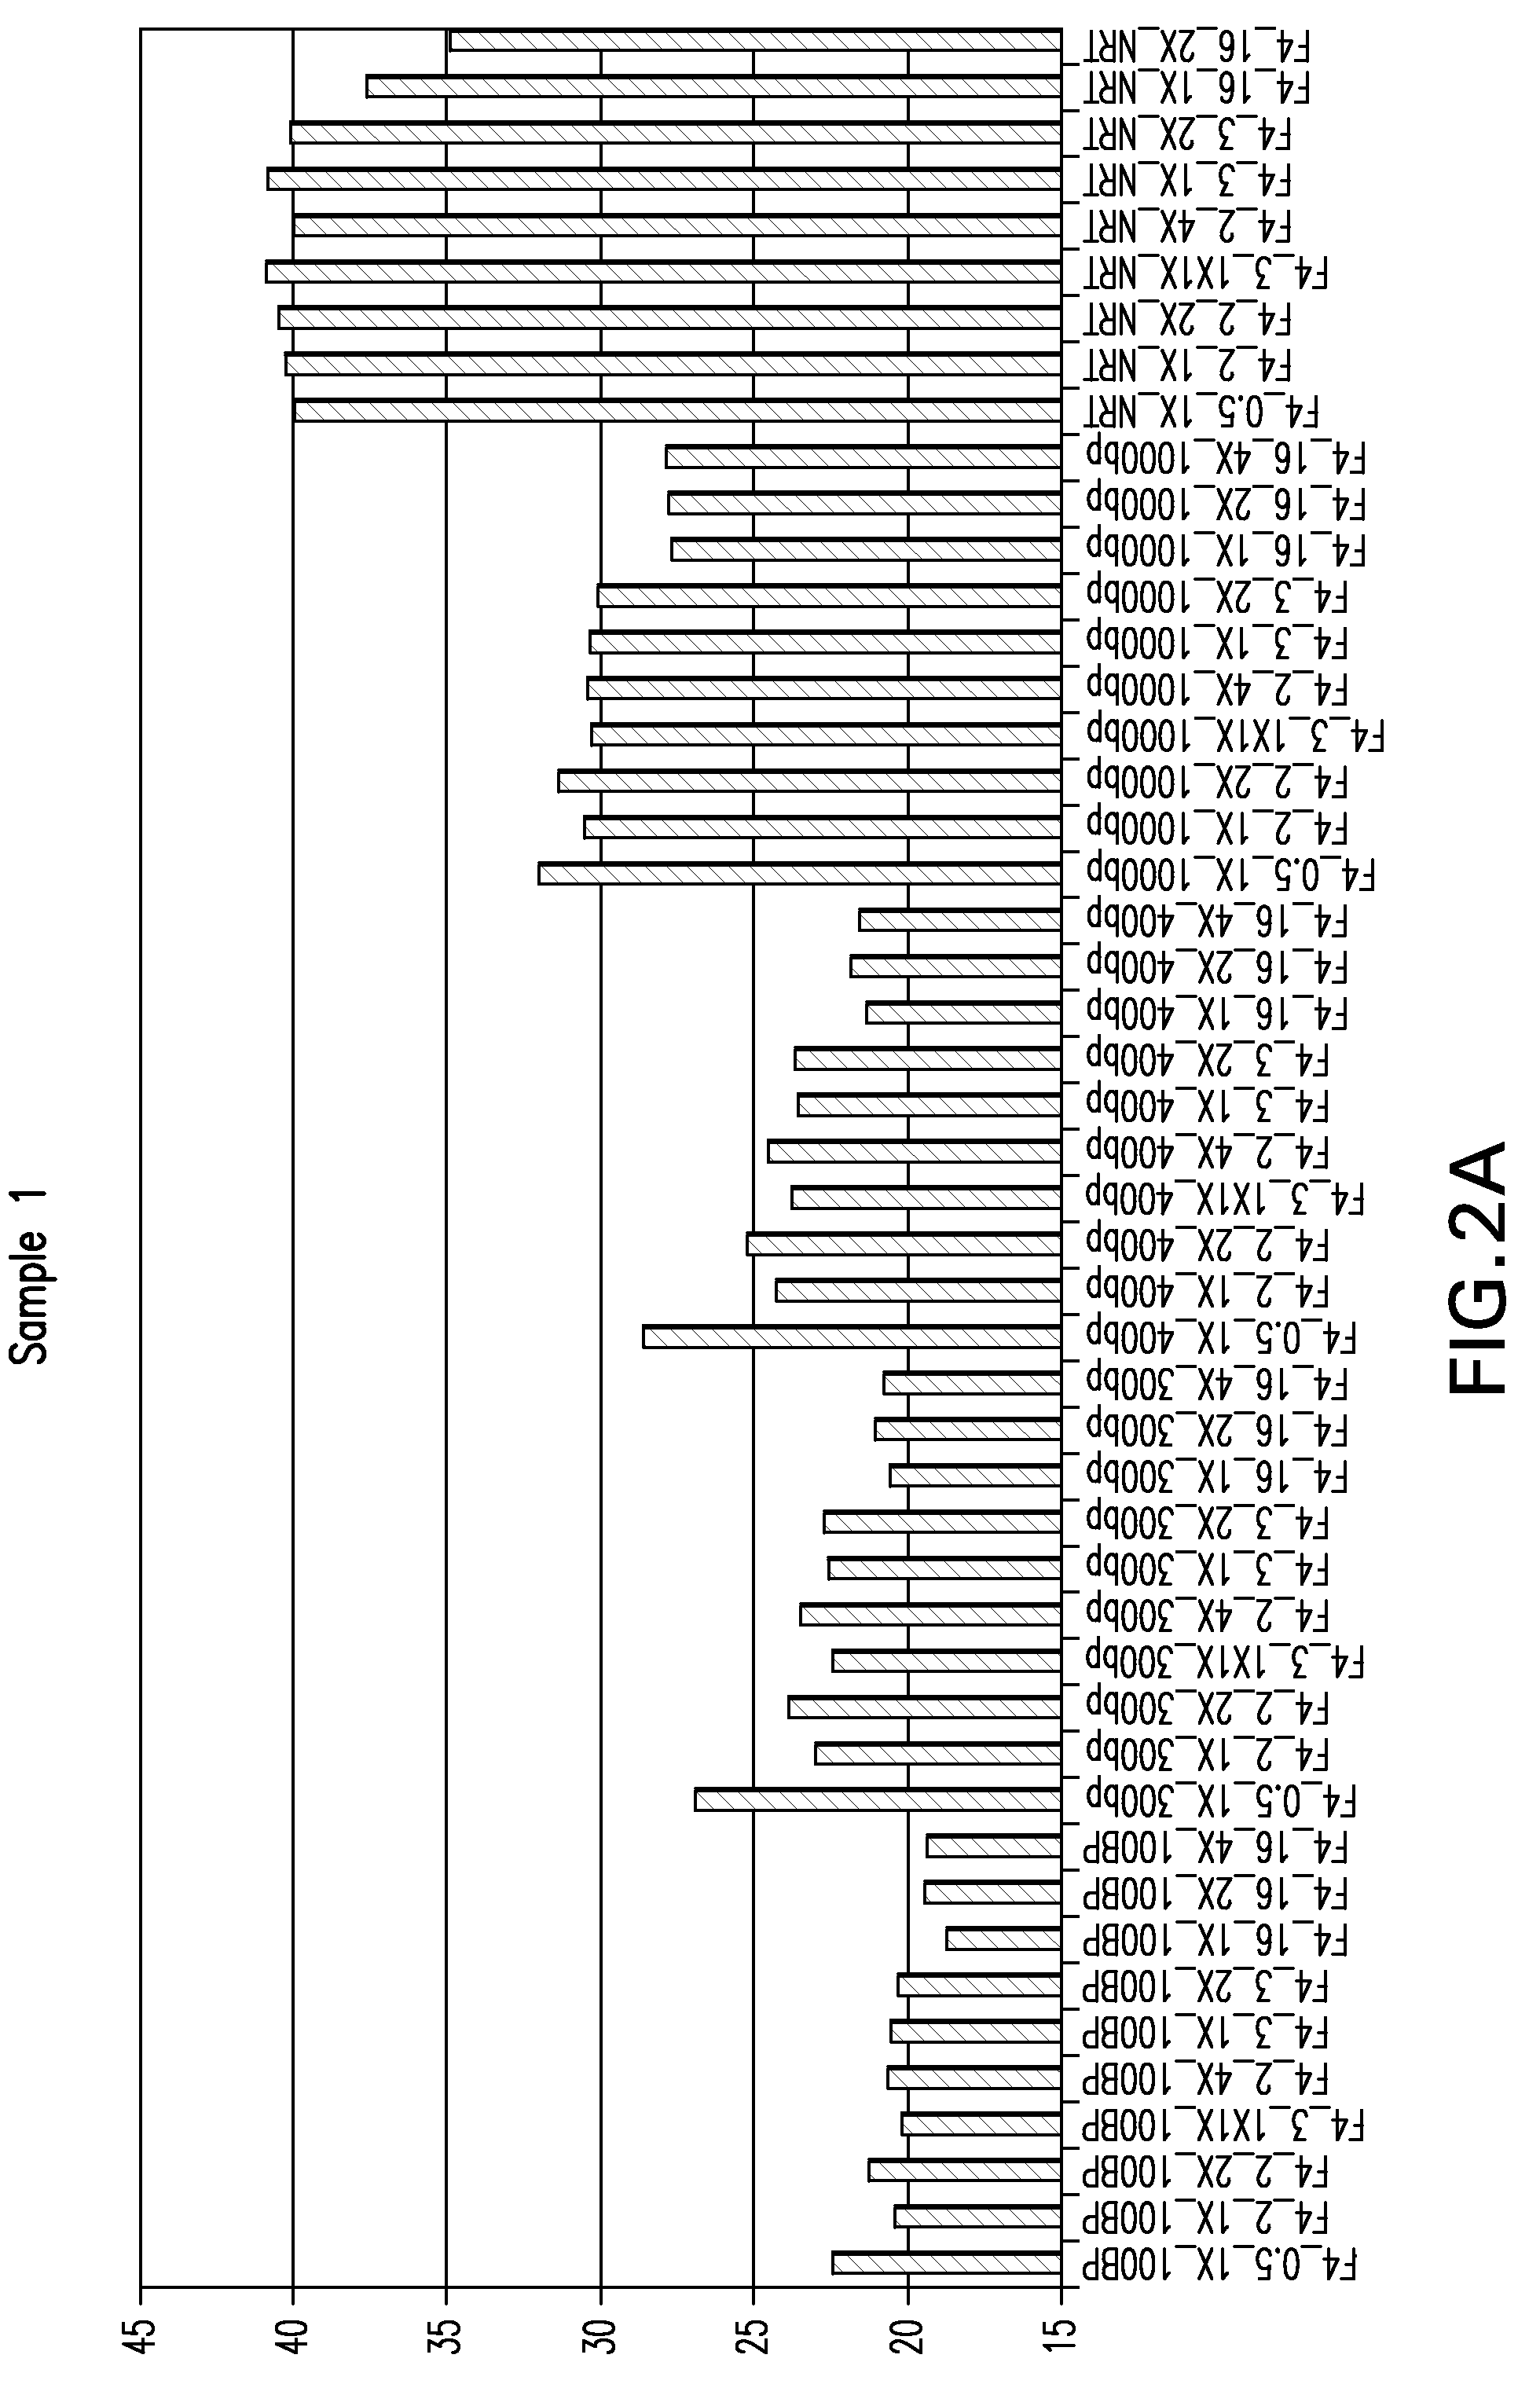 Methods for isolating long fragment RNA from fixed samples